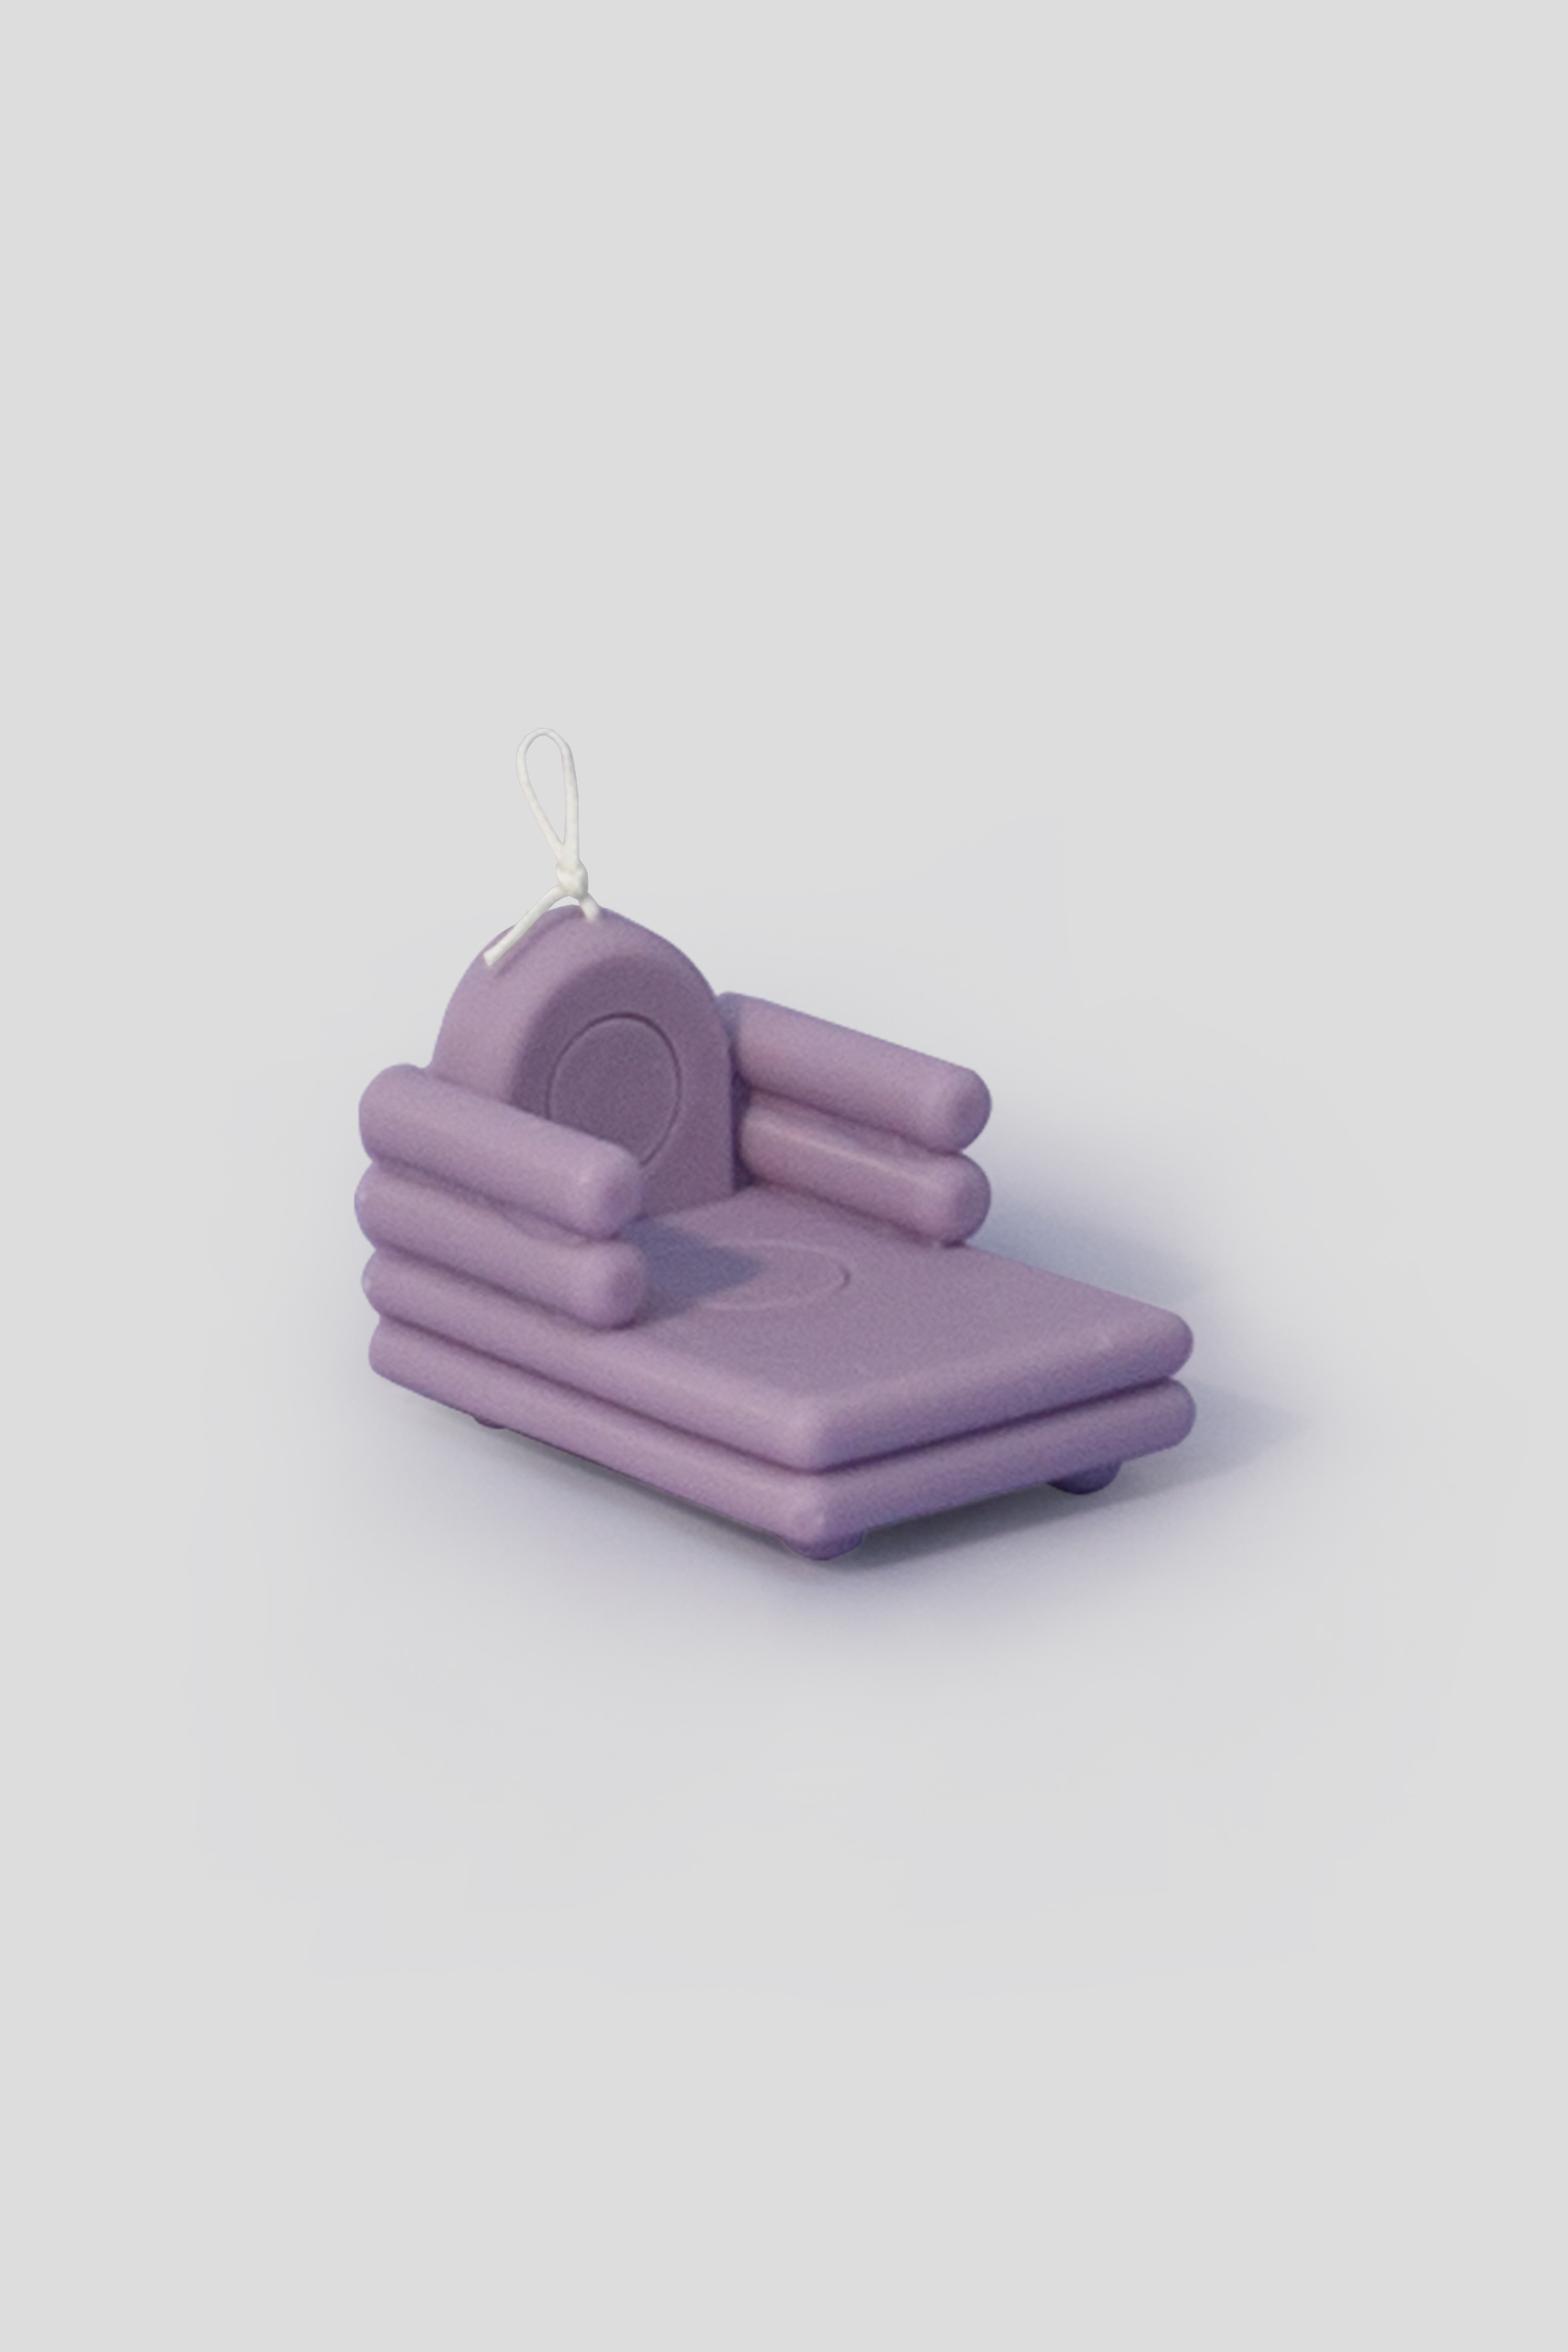 Couch candle in Purple